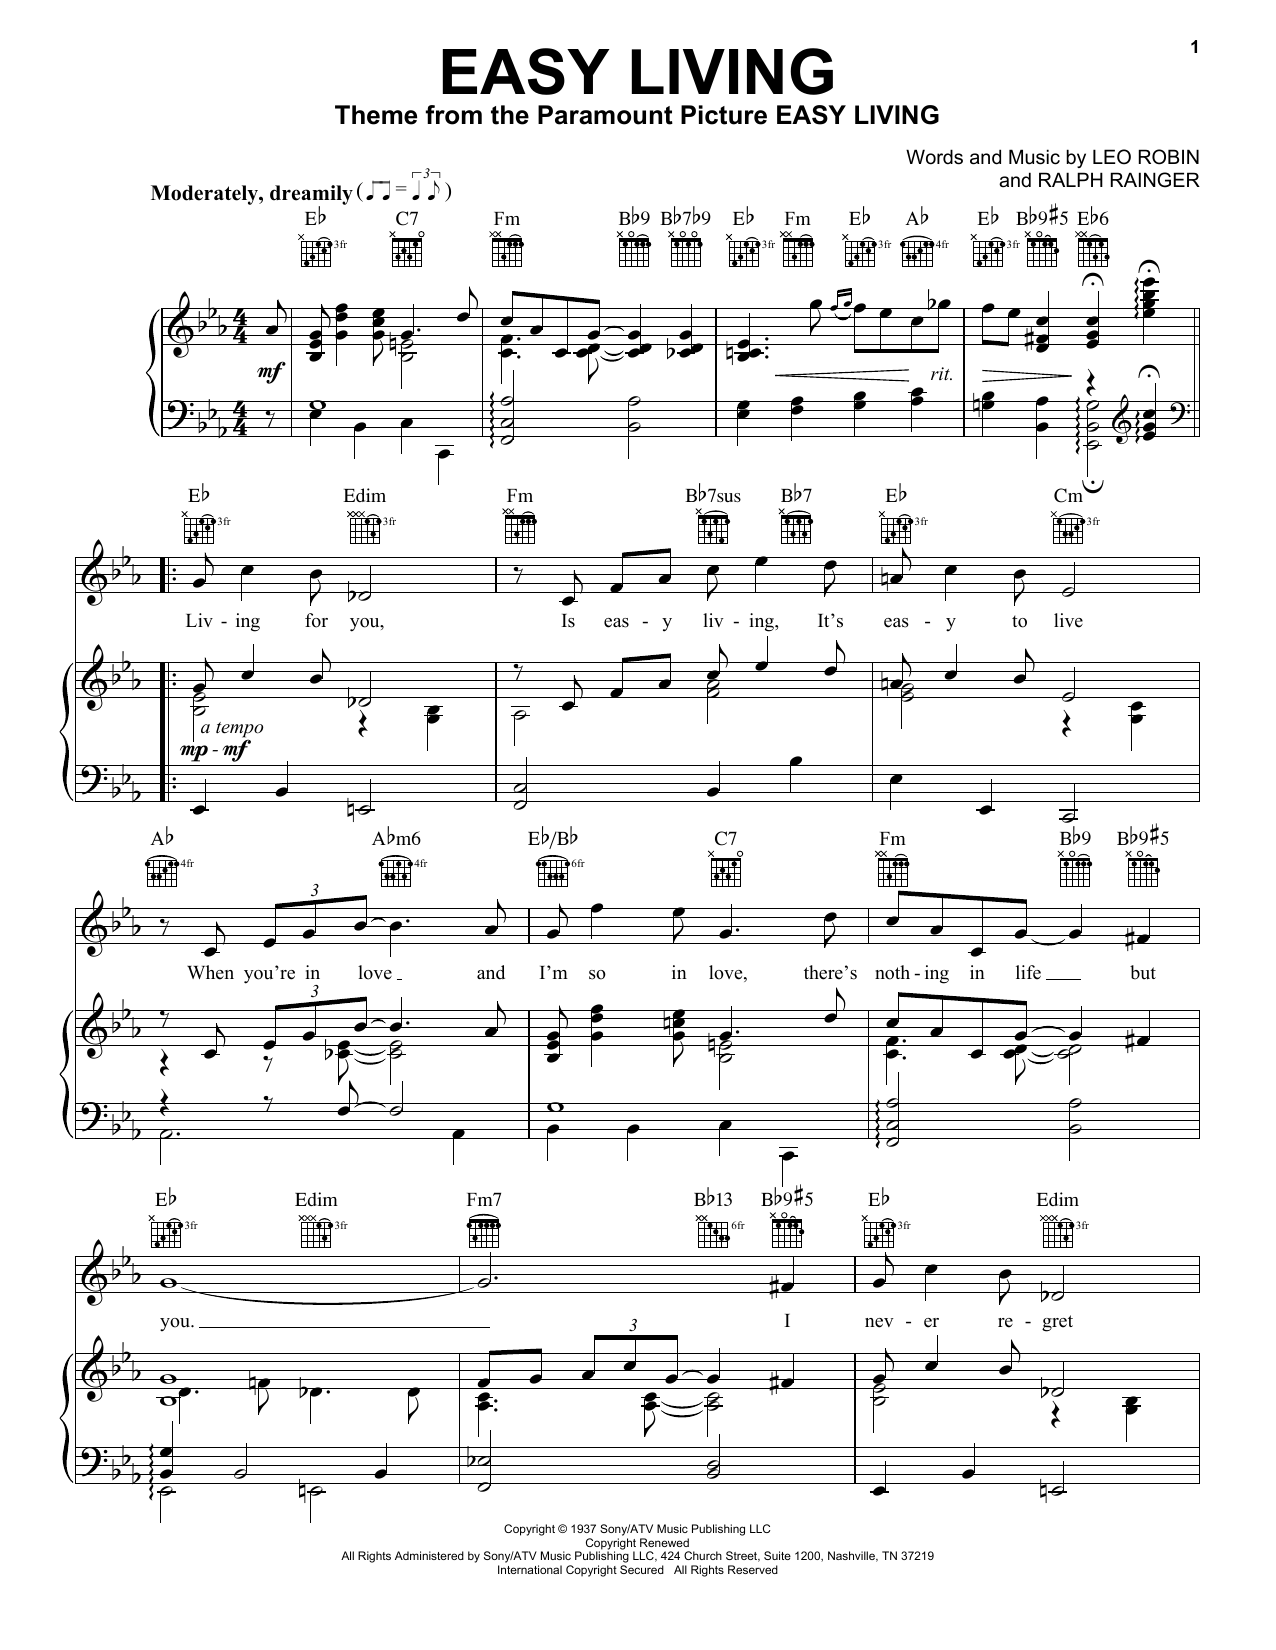 Download Billie Holiday Easy Living Sheet Music